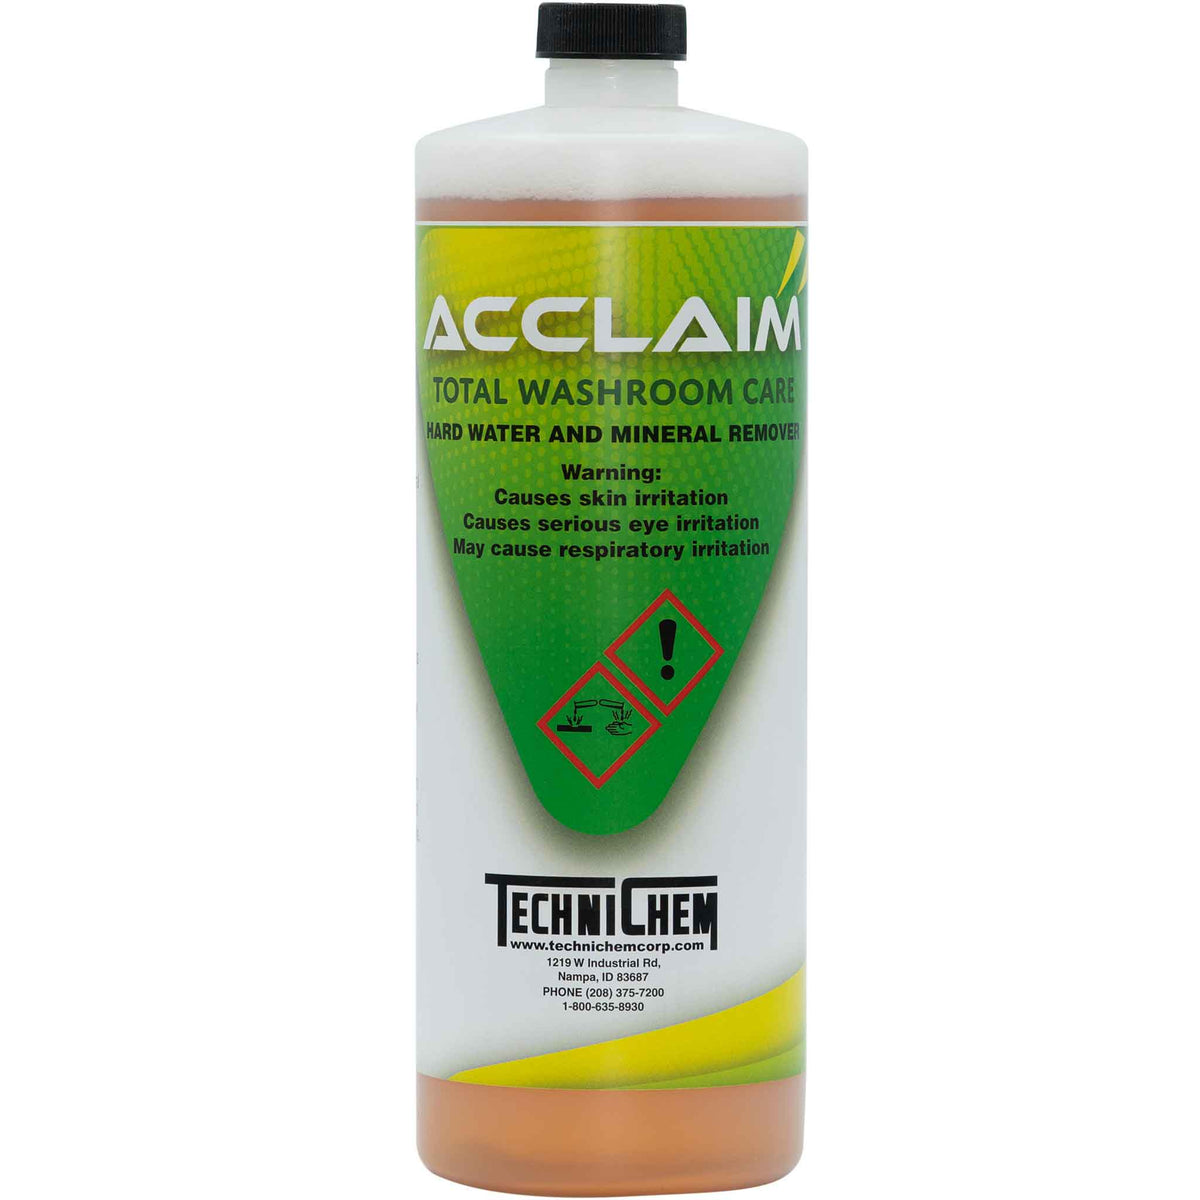 Acclaim Hard Water and Mineral Remover, Size: One size, Yellow